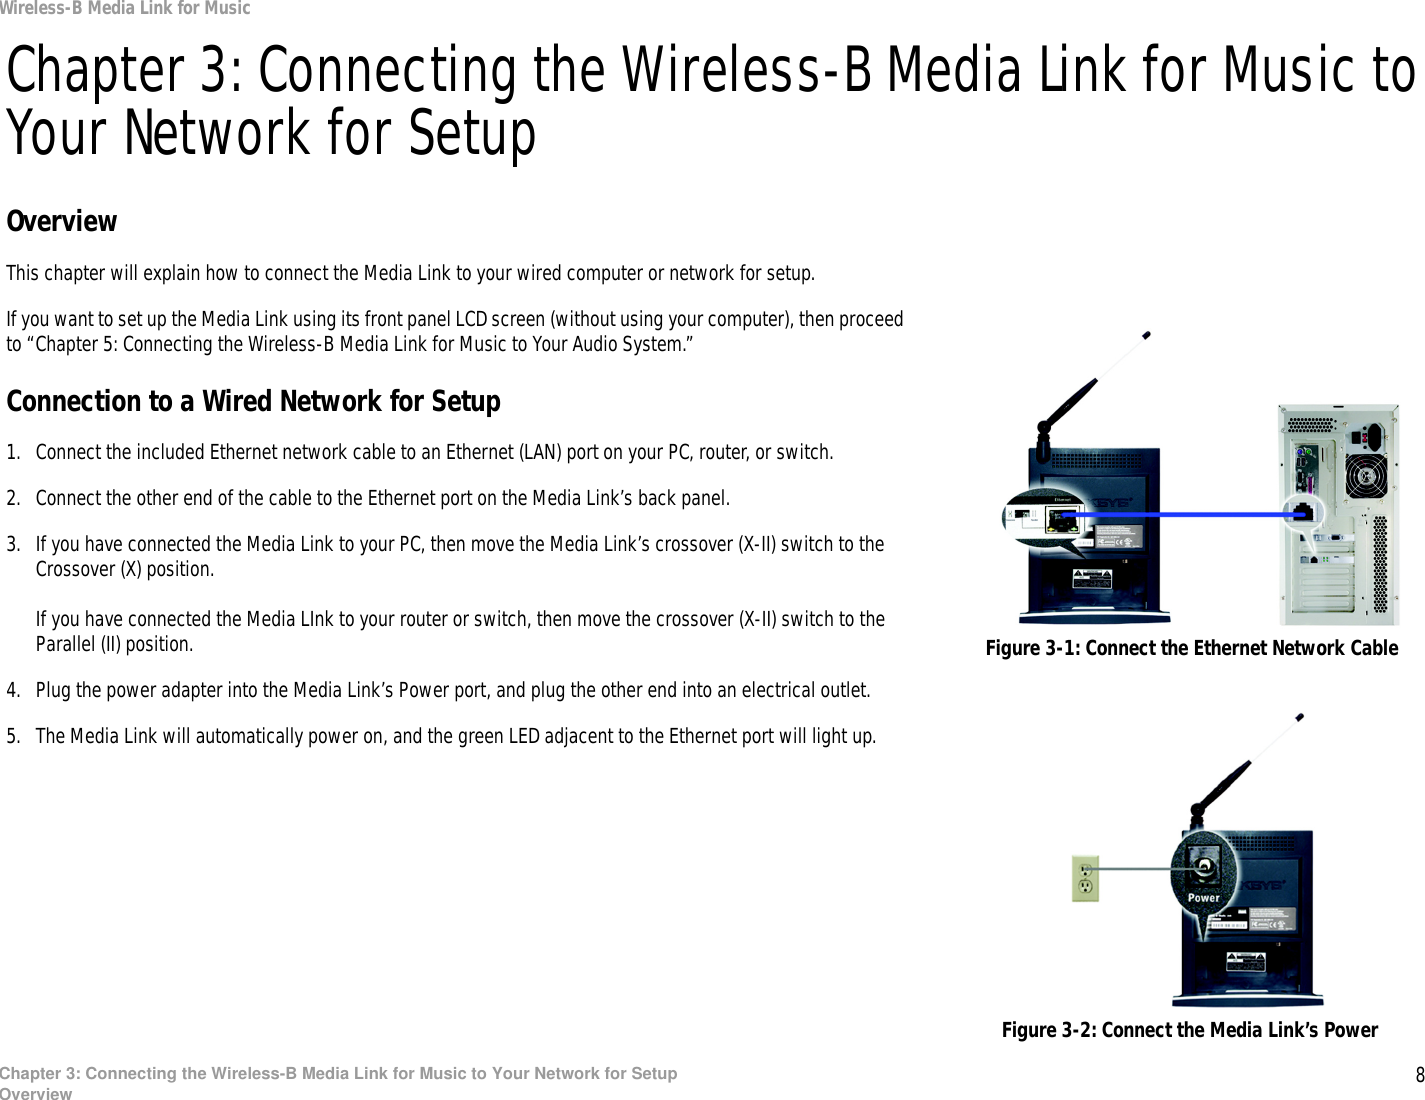 8Chapter 3: Connecting the Wireless-B Media Link for Music to Your Network for SetupOverviewWireless-B Media Link for MusicChapter 3: Connecting the Wireless-B Media Link for Music to Your Network for SetupOverviewThis chapter will explain how to connect the Media Link to your wired computer or network for setup.If you want to set up the Media Link using its front panel LCD screen (without using your computer), then proceed to “Chapter 5: Connecting the Wireless-B Media Link for Music to Your Audio System.”Connection to a Wired Network for Setup1. Connect the included Ethernet network cable to an Ethernet (LAN) port on your PC, router, or switch.2. Connect the other end of the cable to the Ethernet port on the Media Link’s back panel.3. If you have connected the Media Link to your PC, then move the Media Link’s crossover (X-II) switch to the Crossover (X) position.If you have connected the Media LInk to your router or switch, then move the crossover (X-II) switch to the Parallel (II) position.4. Plug the power adapter into the Media Link’s Power port, and plug the other end into an electrical outlet.5. The Media Link will automatically power on, and the green LED adjacent to the Ethernet port will light up.Figure 3-1: Connect the Ethernet Network CableFigure 3-2: Connect the Media Link’s Power